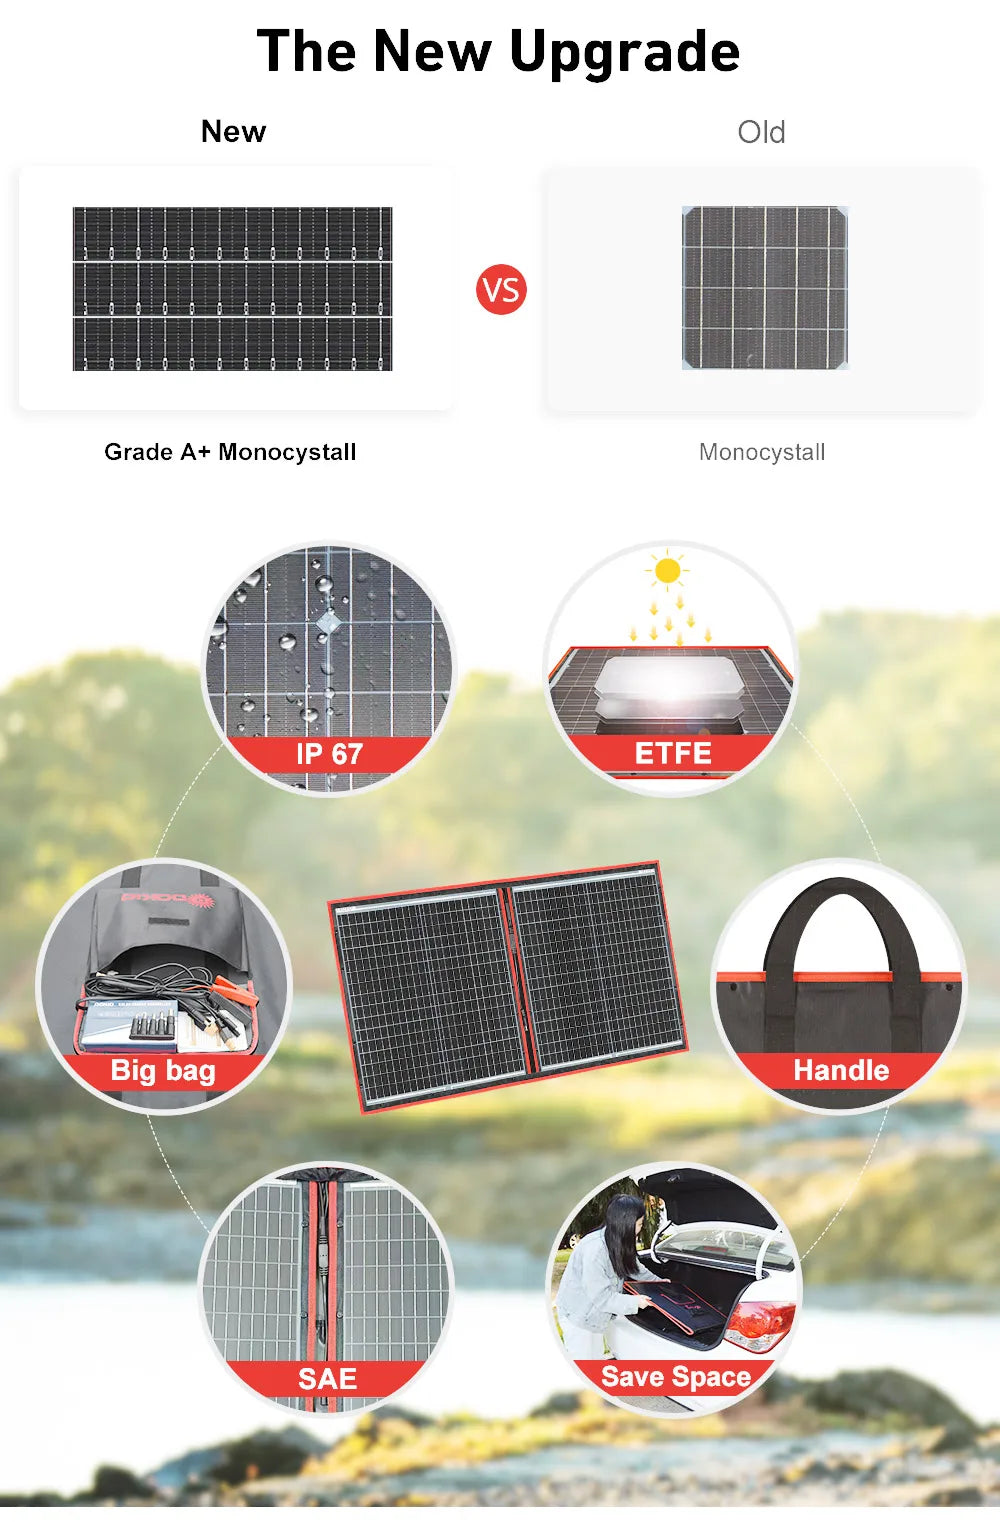 DOKIO 18V 100W 300W Portable Ffolding Solar Panel, Upgraded DOKIO solar panel with premium features: water-resistant, durable, and portable.